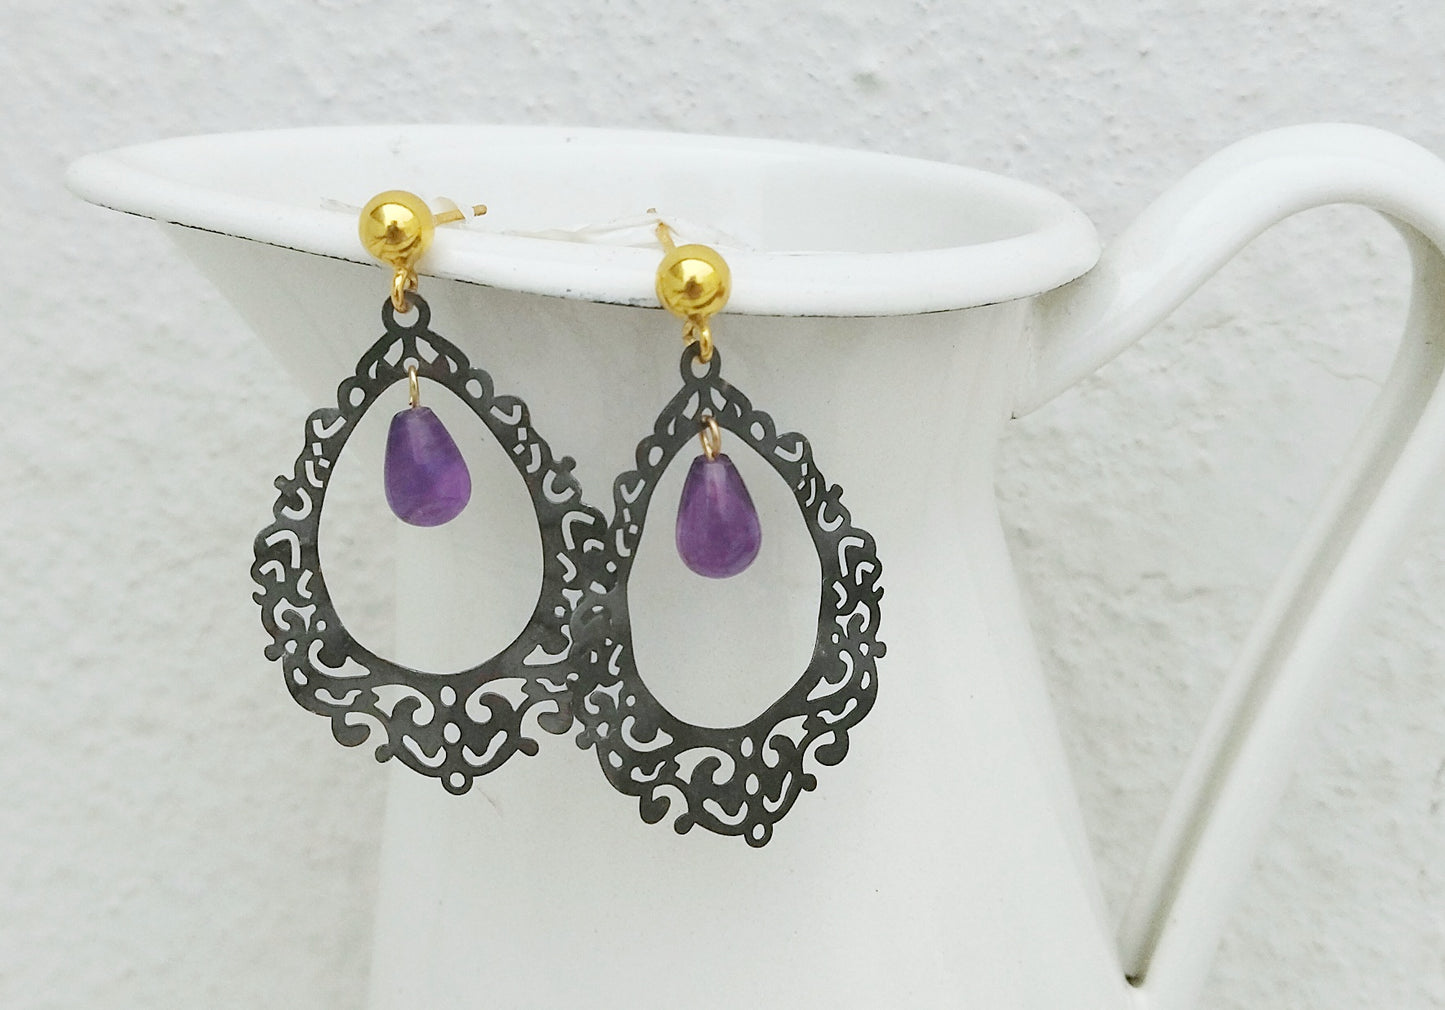 Black Amethyst Filigree Earrings, Cosplay Costume Jewelry For Gothic Princess